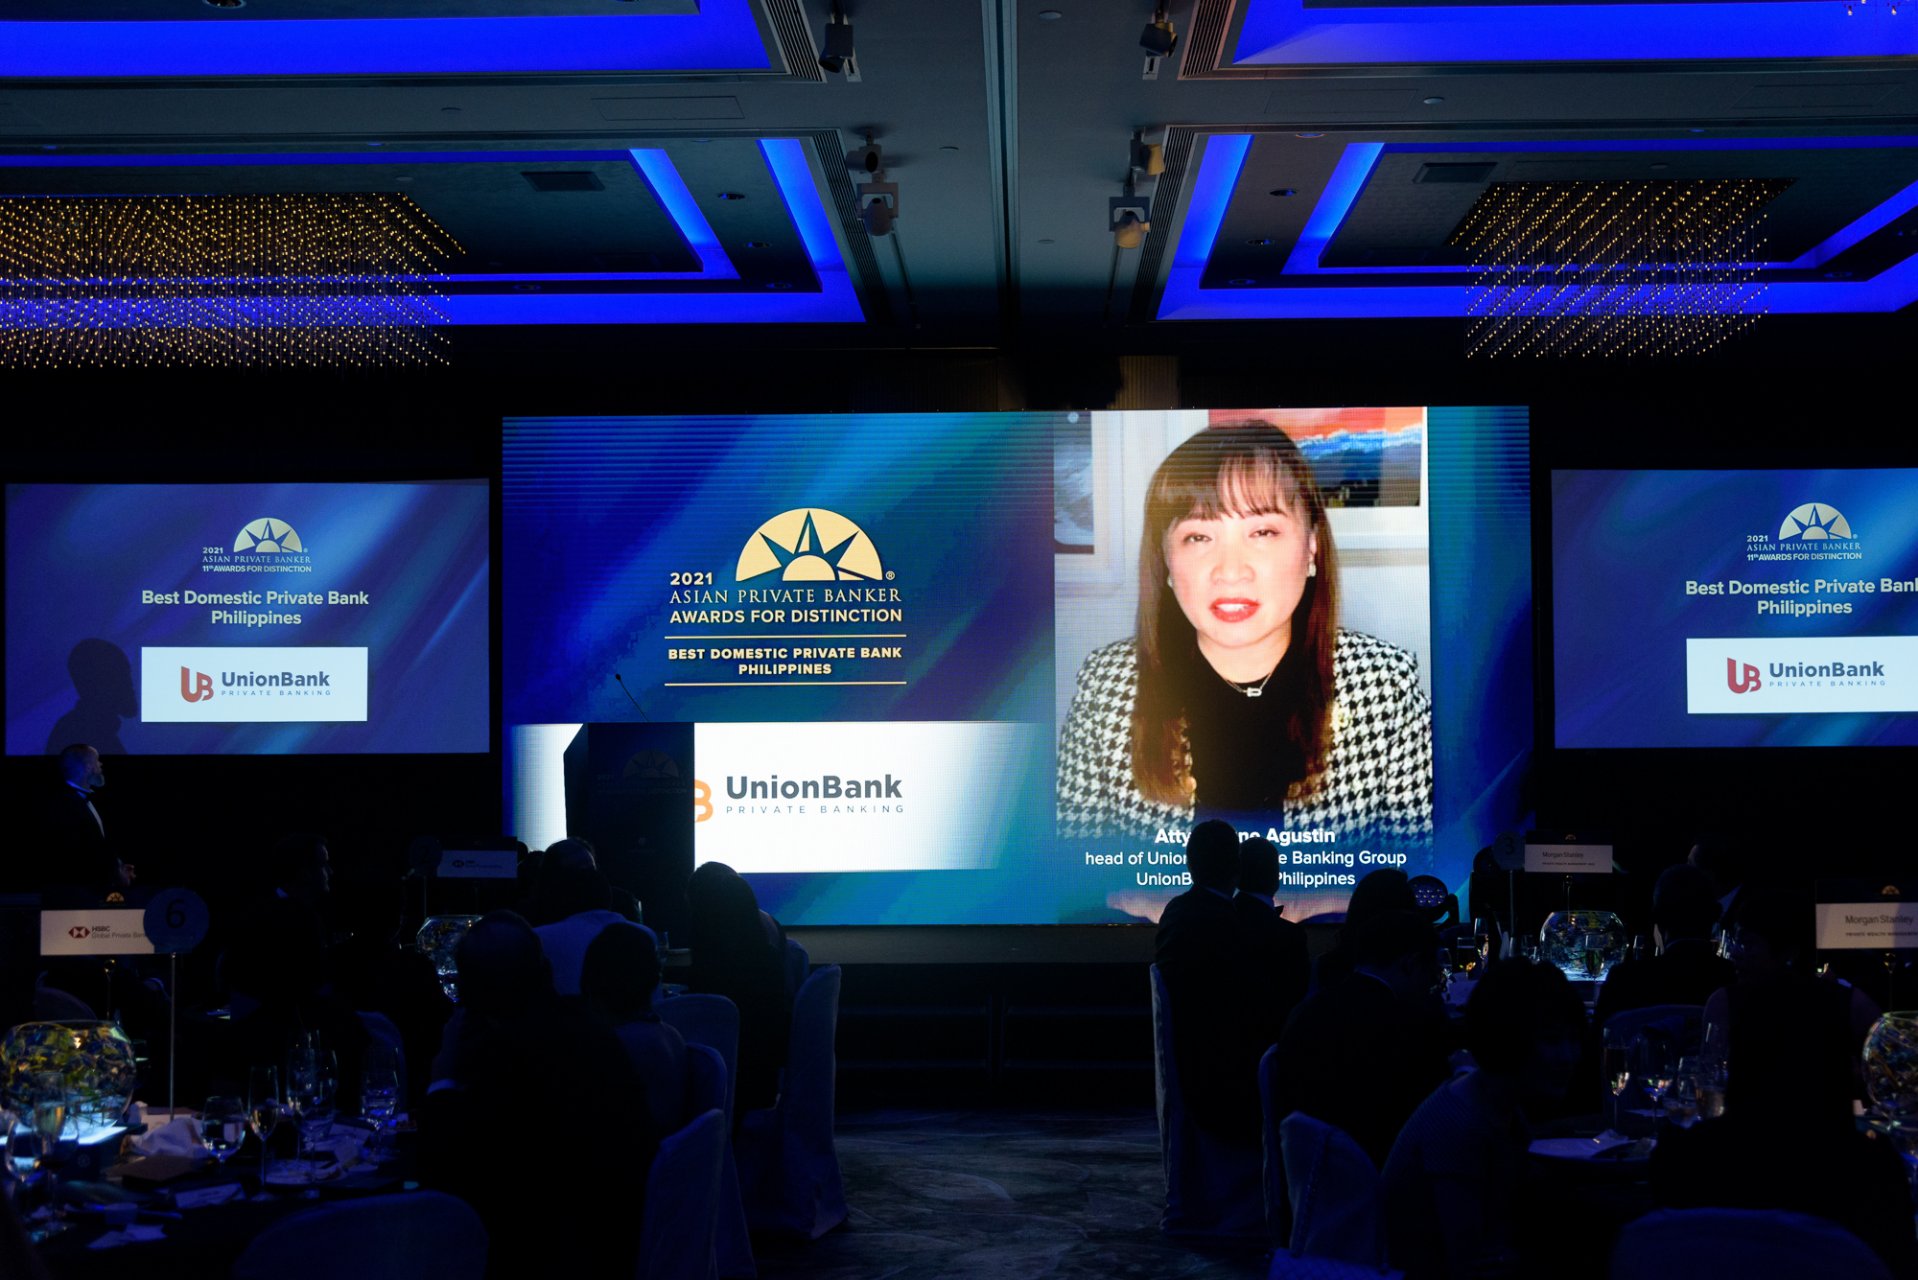 UnionBank of the Philippines' Private Banking Head, Atty. Arlene Agustin says a few words on their win as Best Domestic Private Bank – Philippines